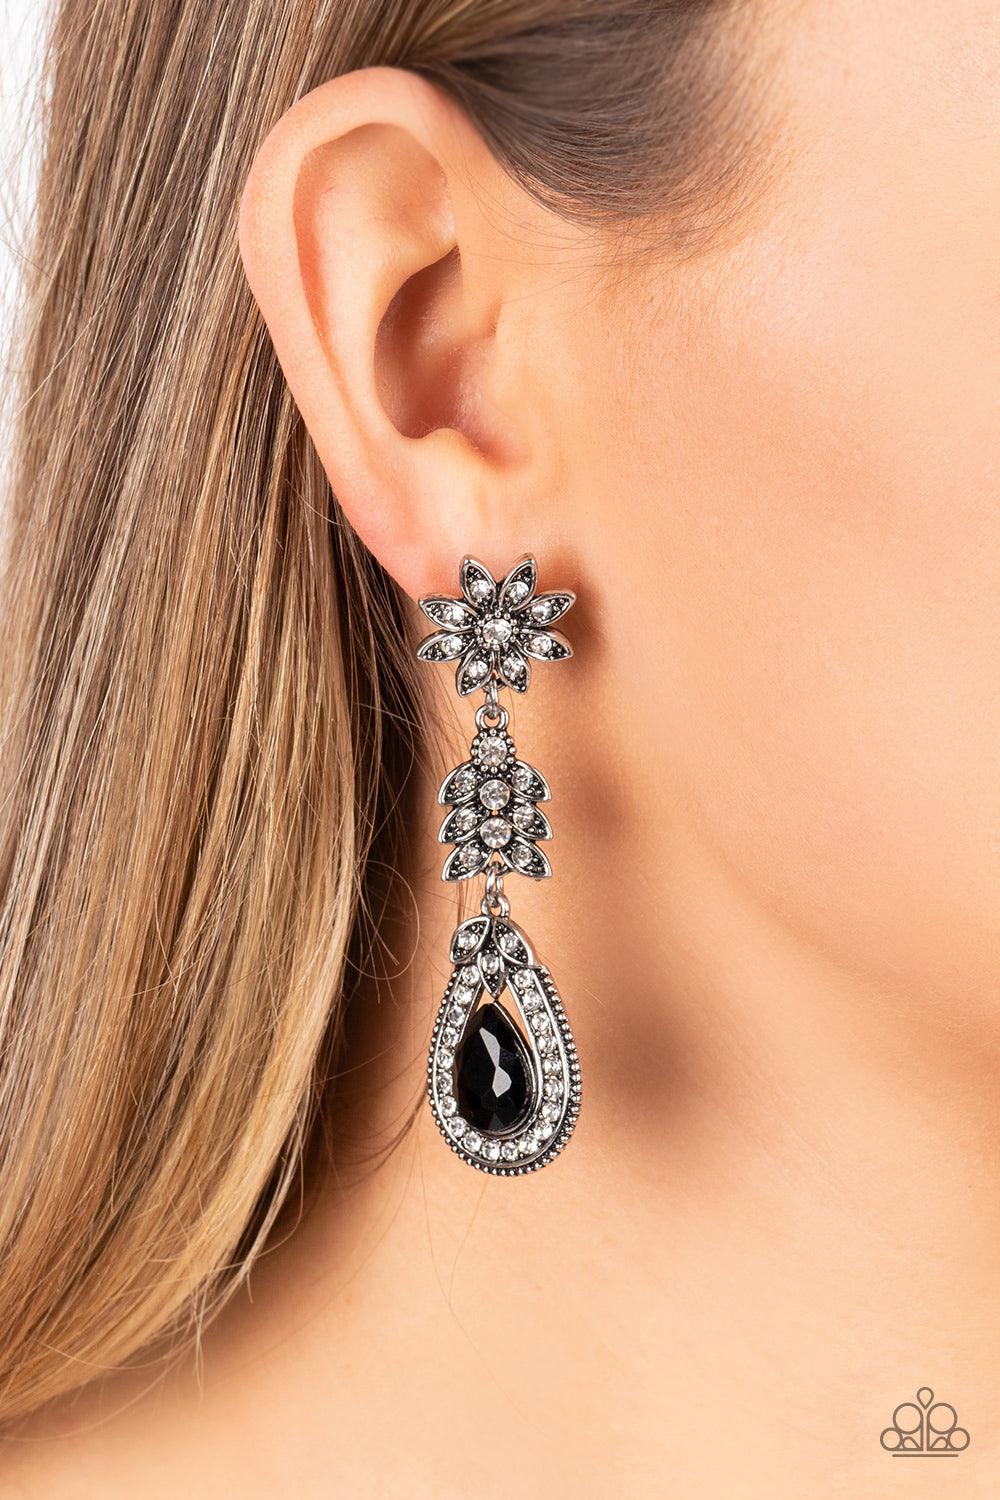 Paparazzi Accessories Floral Fantasy - Black Dotted in dainty white rhinestones, a studded silver flower gives way to a leafy frame that is delicately suspended above a decorative white rhinestone dotted teardrop frame. An oversized black teardrop gem see